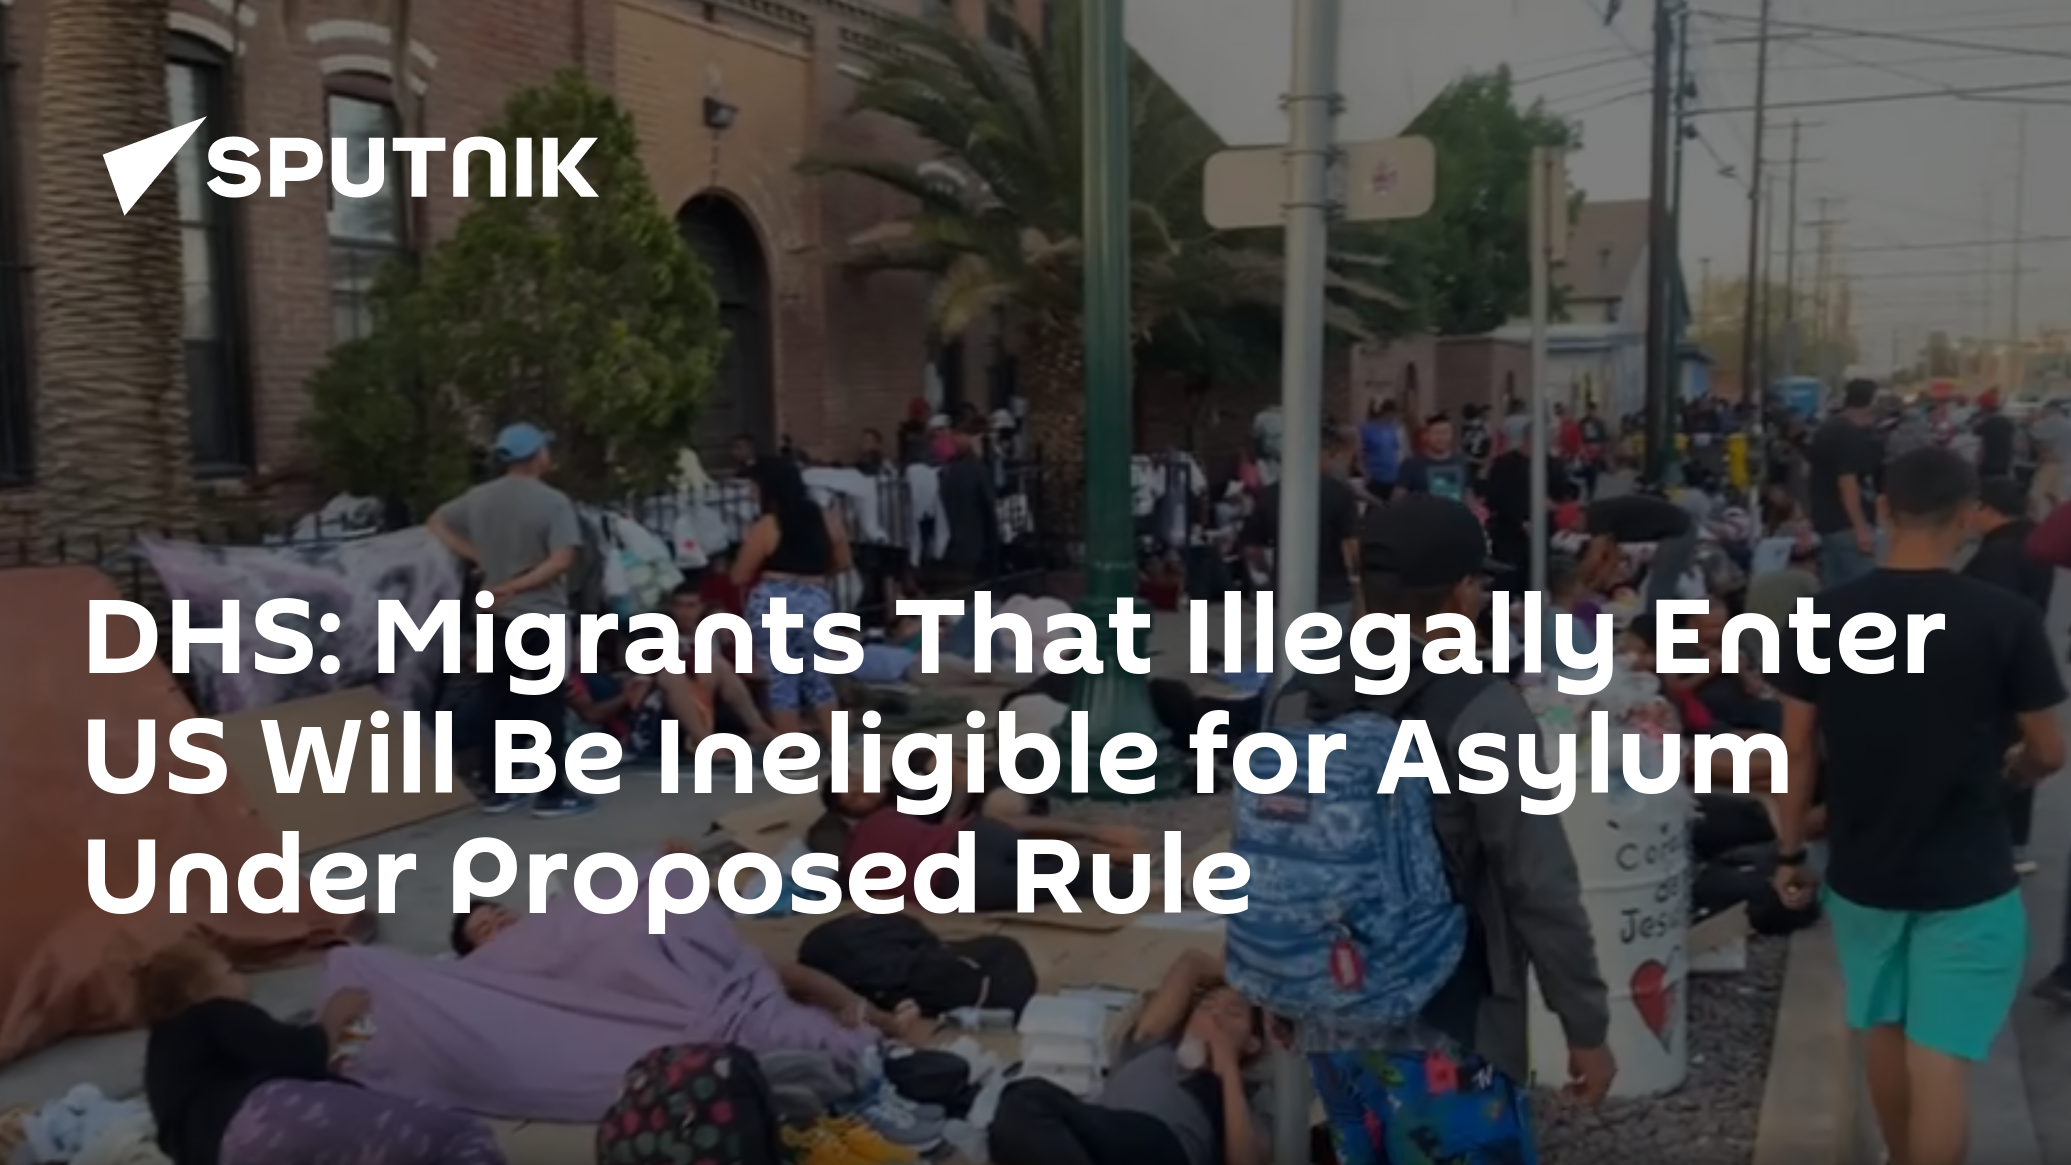 DHS: Migrants That Illegally Enter US Will Be Ineligible for Asylum Under Proposed Rule